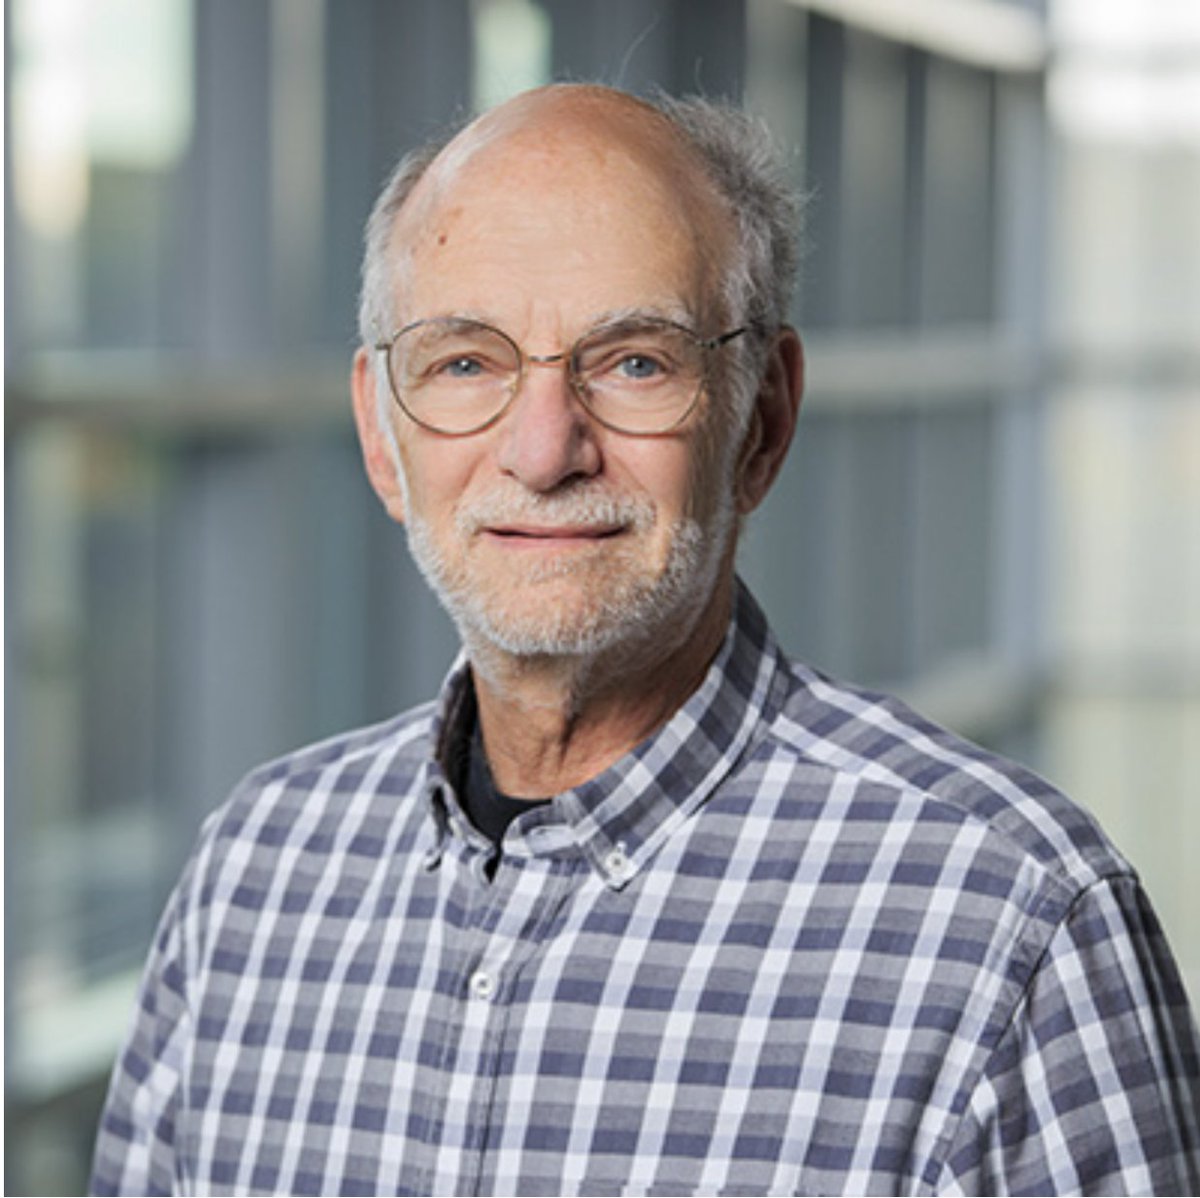 #OpenNeuroPSI  
Do not miss the NeuroPSI-Chen Institute Joint Conference. Attend online on May 11-12th, and join us to hear Nobel Prize laureate Michael Rosbash describe how organisms keep time!
#neuroscience #Drosophila #circadianclock